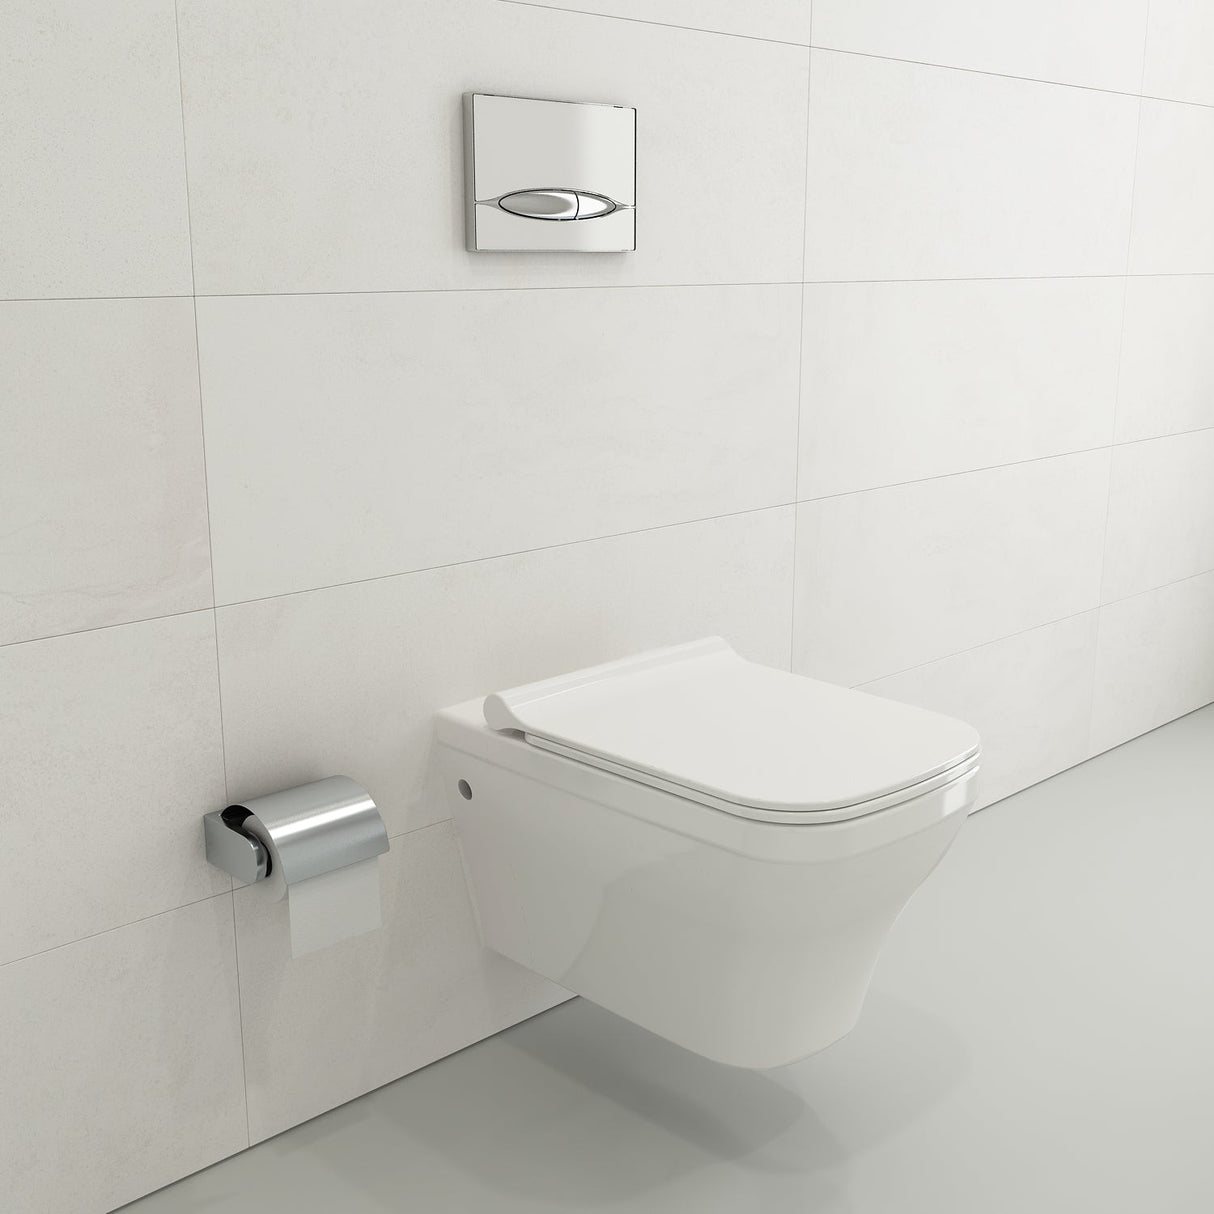 BOCCHI 1304-001-0129 Firenze Wall-Hung Toilet Bowl in White